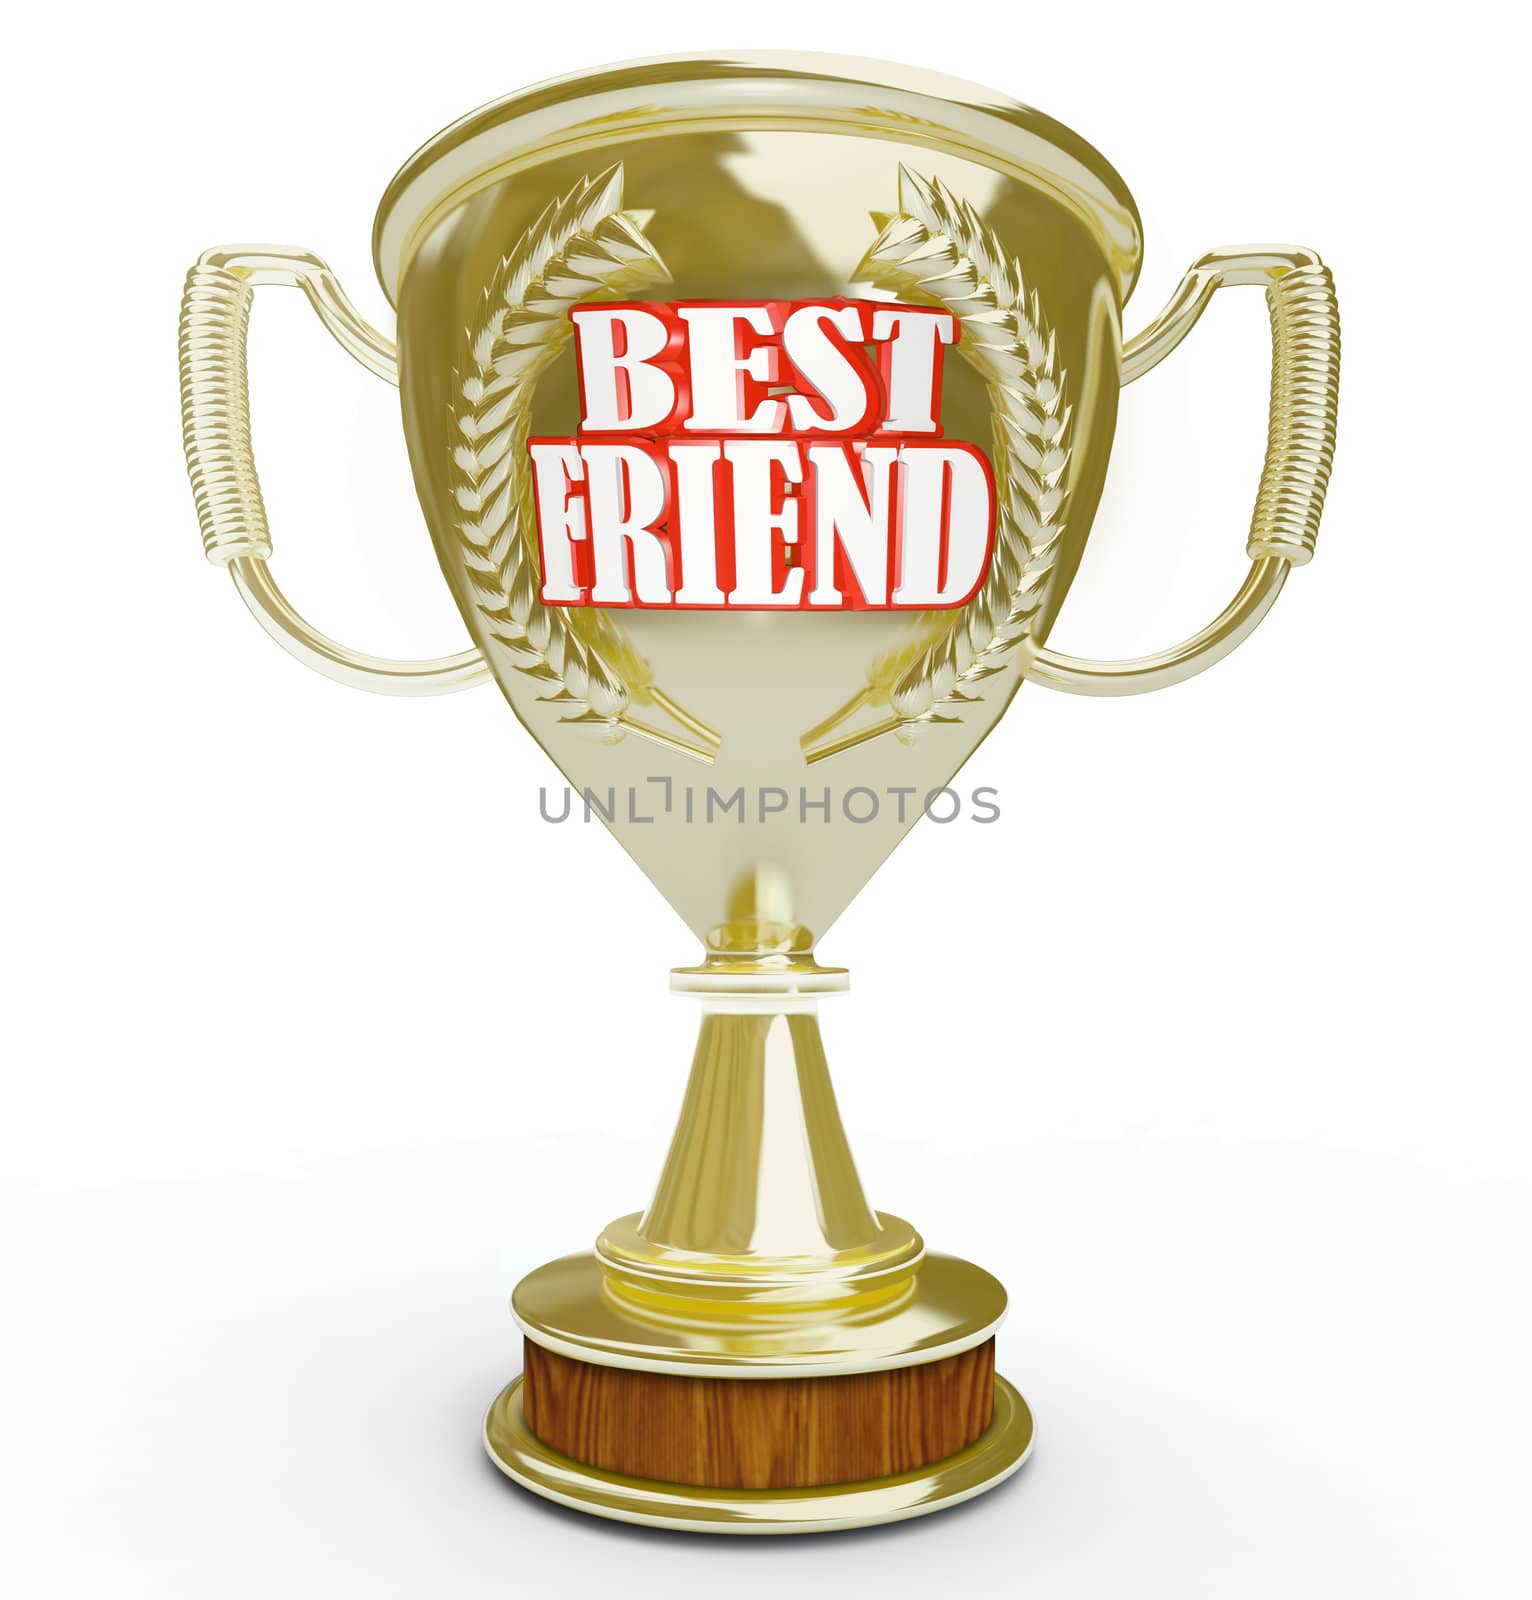 A golden trophy with the words Best Friend given to a person who is your greatest companion in life and has shared good times and helped you in difficult times